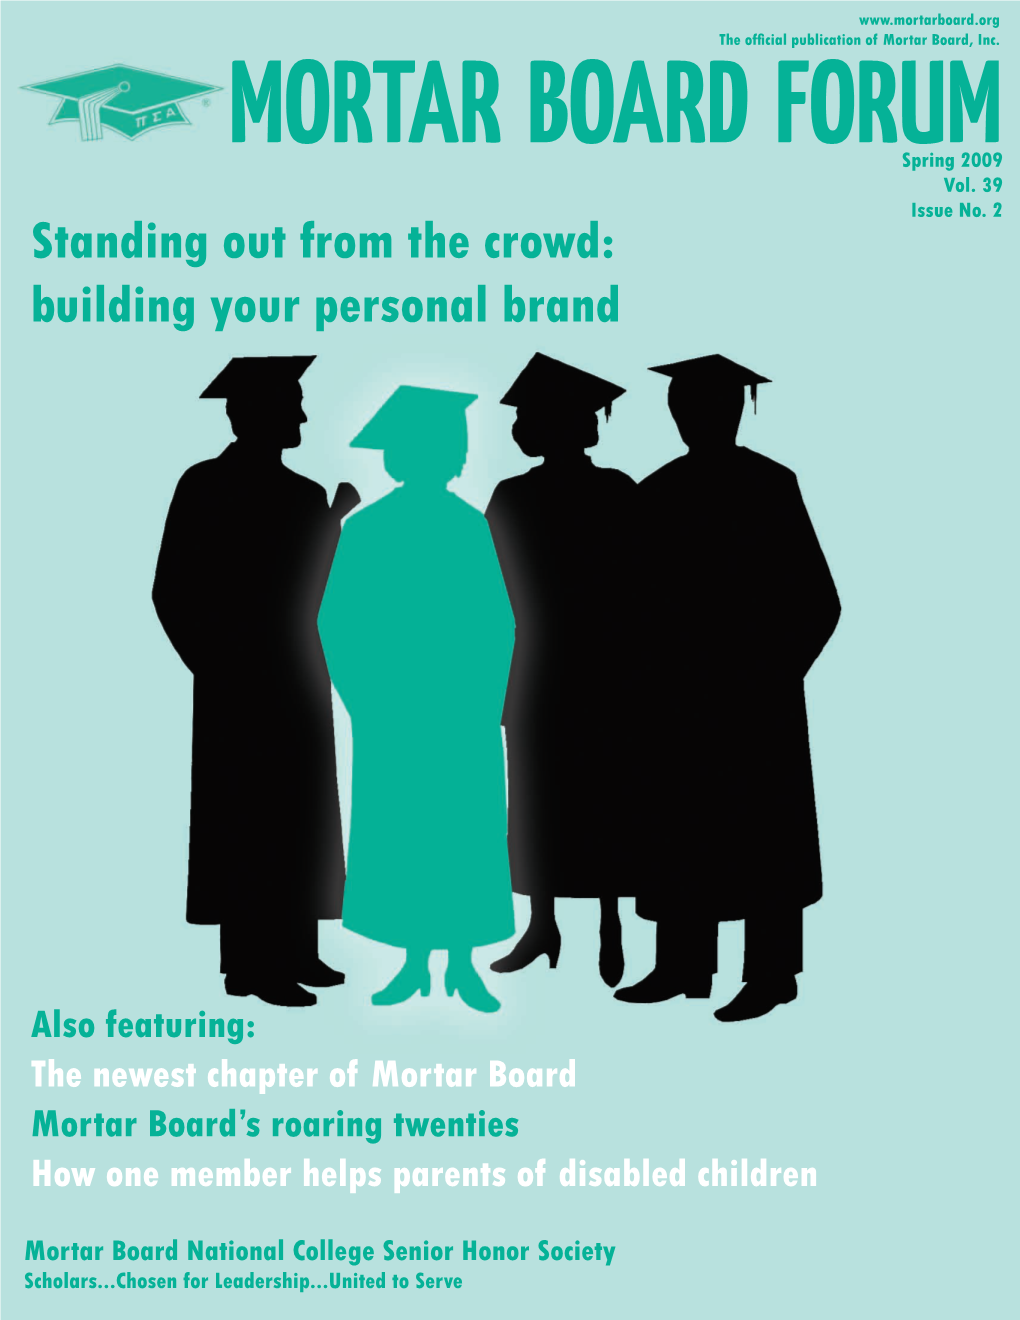 Standing out from the Crowd: Building Your Personal Brand